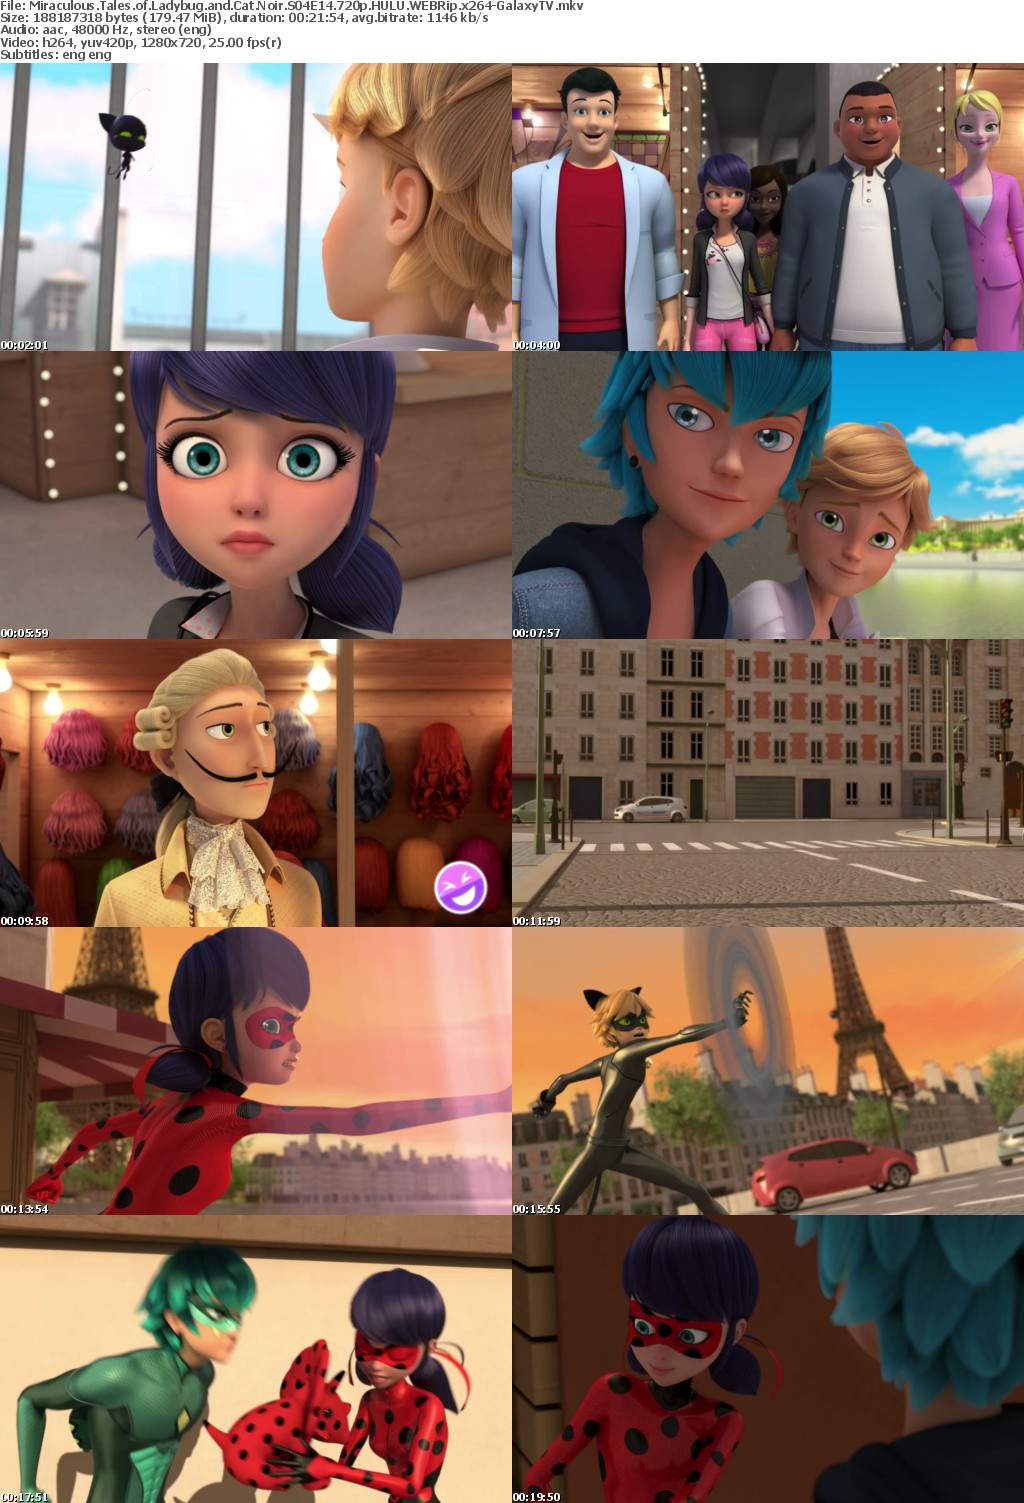 Miraculous Tales of Ladybug and Cat Noir S04 COMPLETE 720p HULU WEBRip x264-GalaxyTV